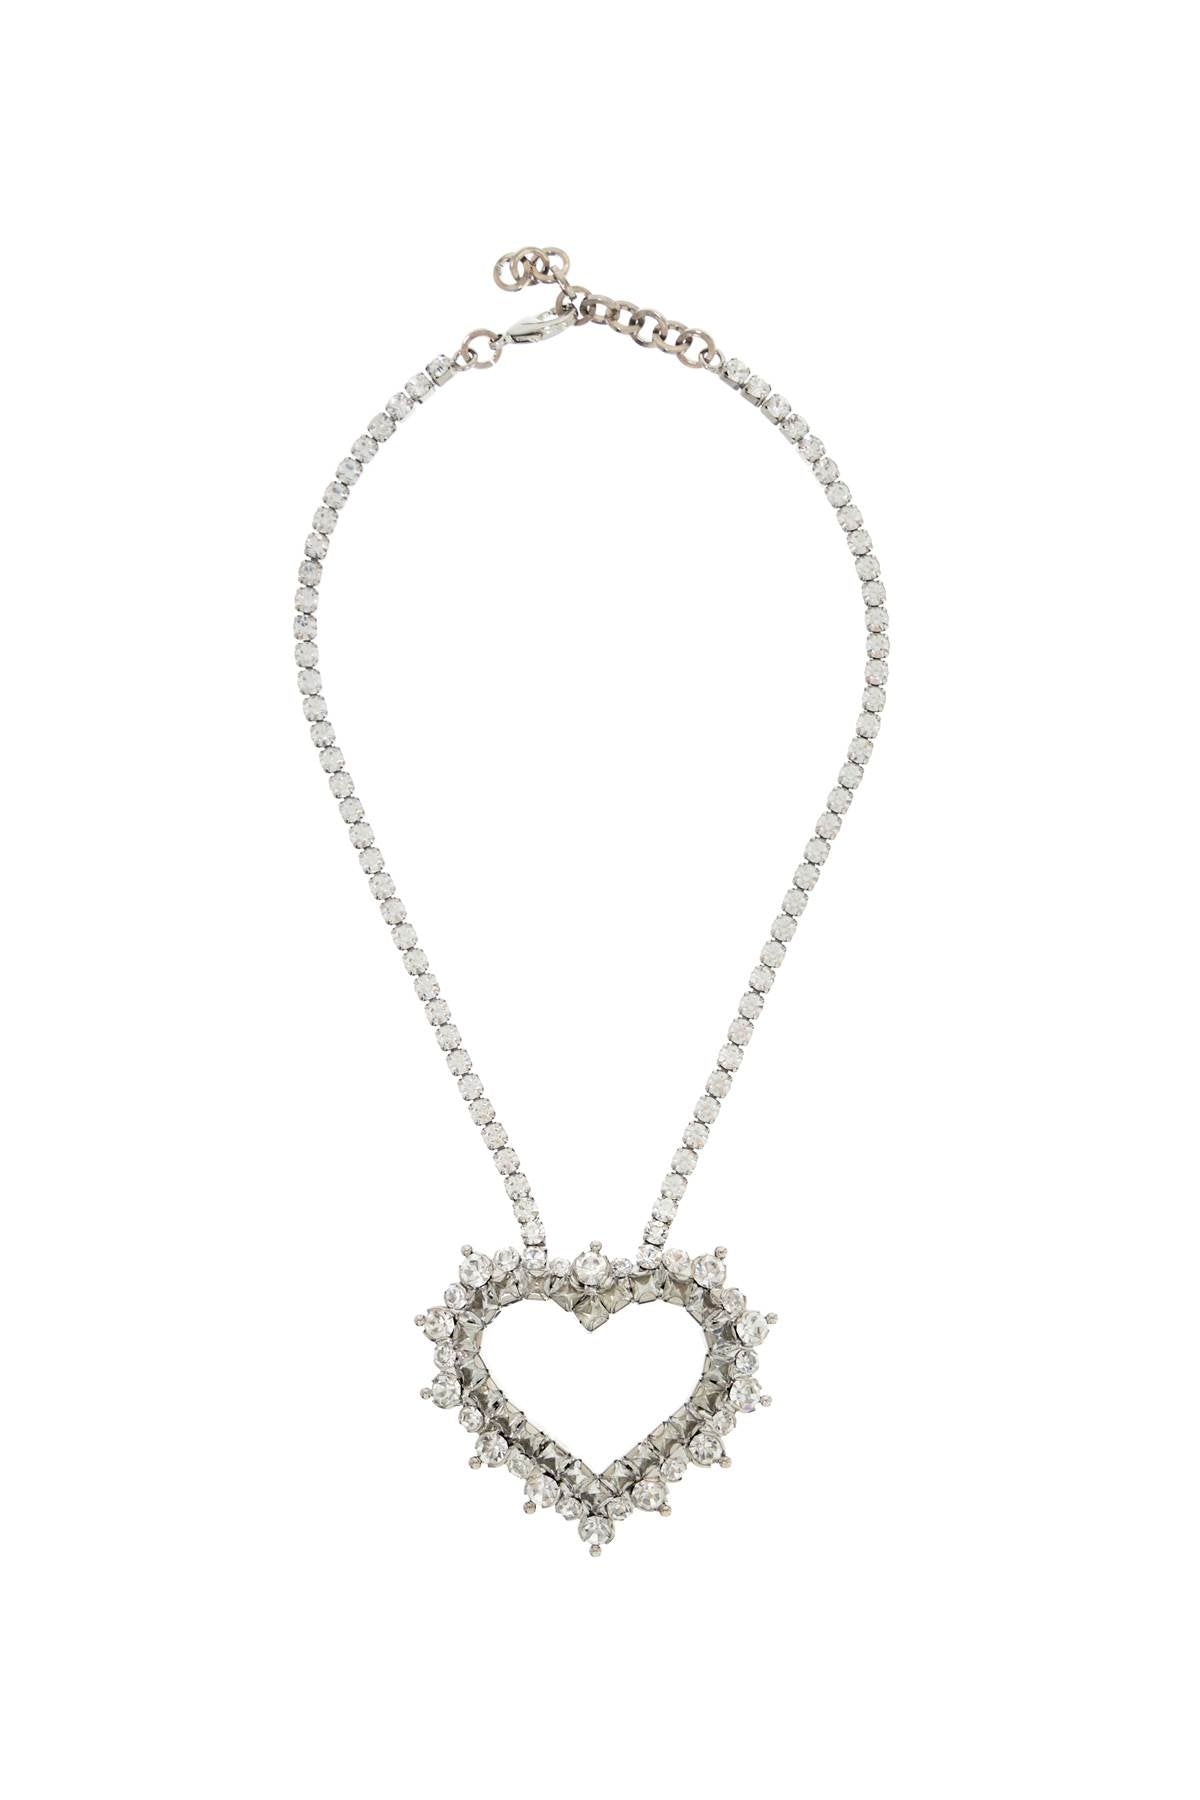 necklace with heart pendant FABA3200 J0004 CRY-SILVER